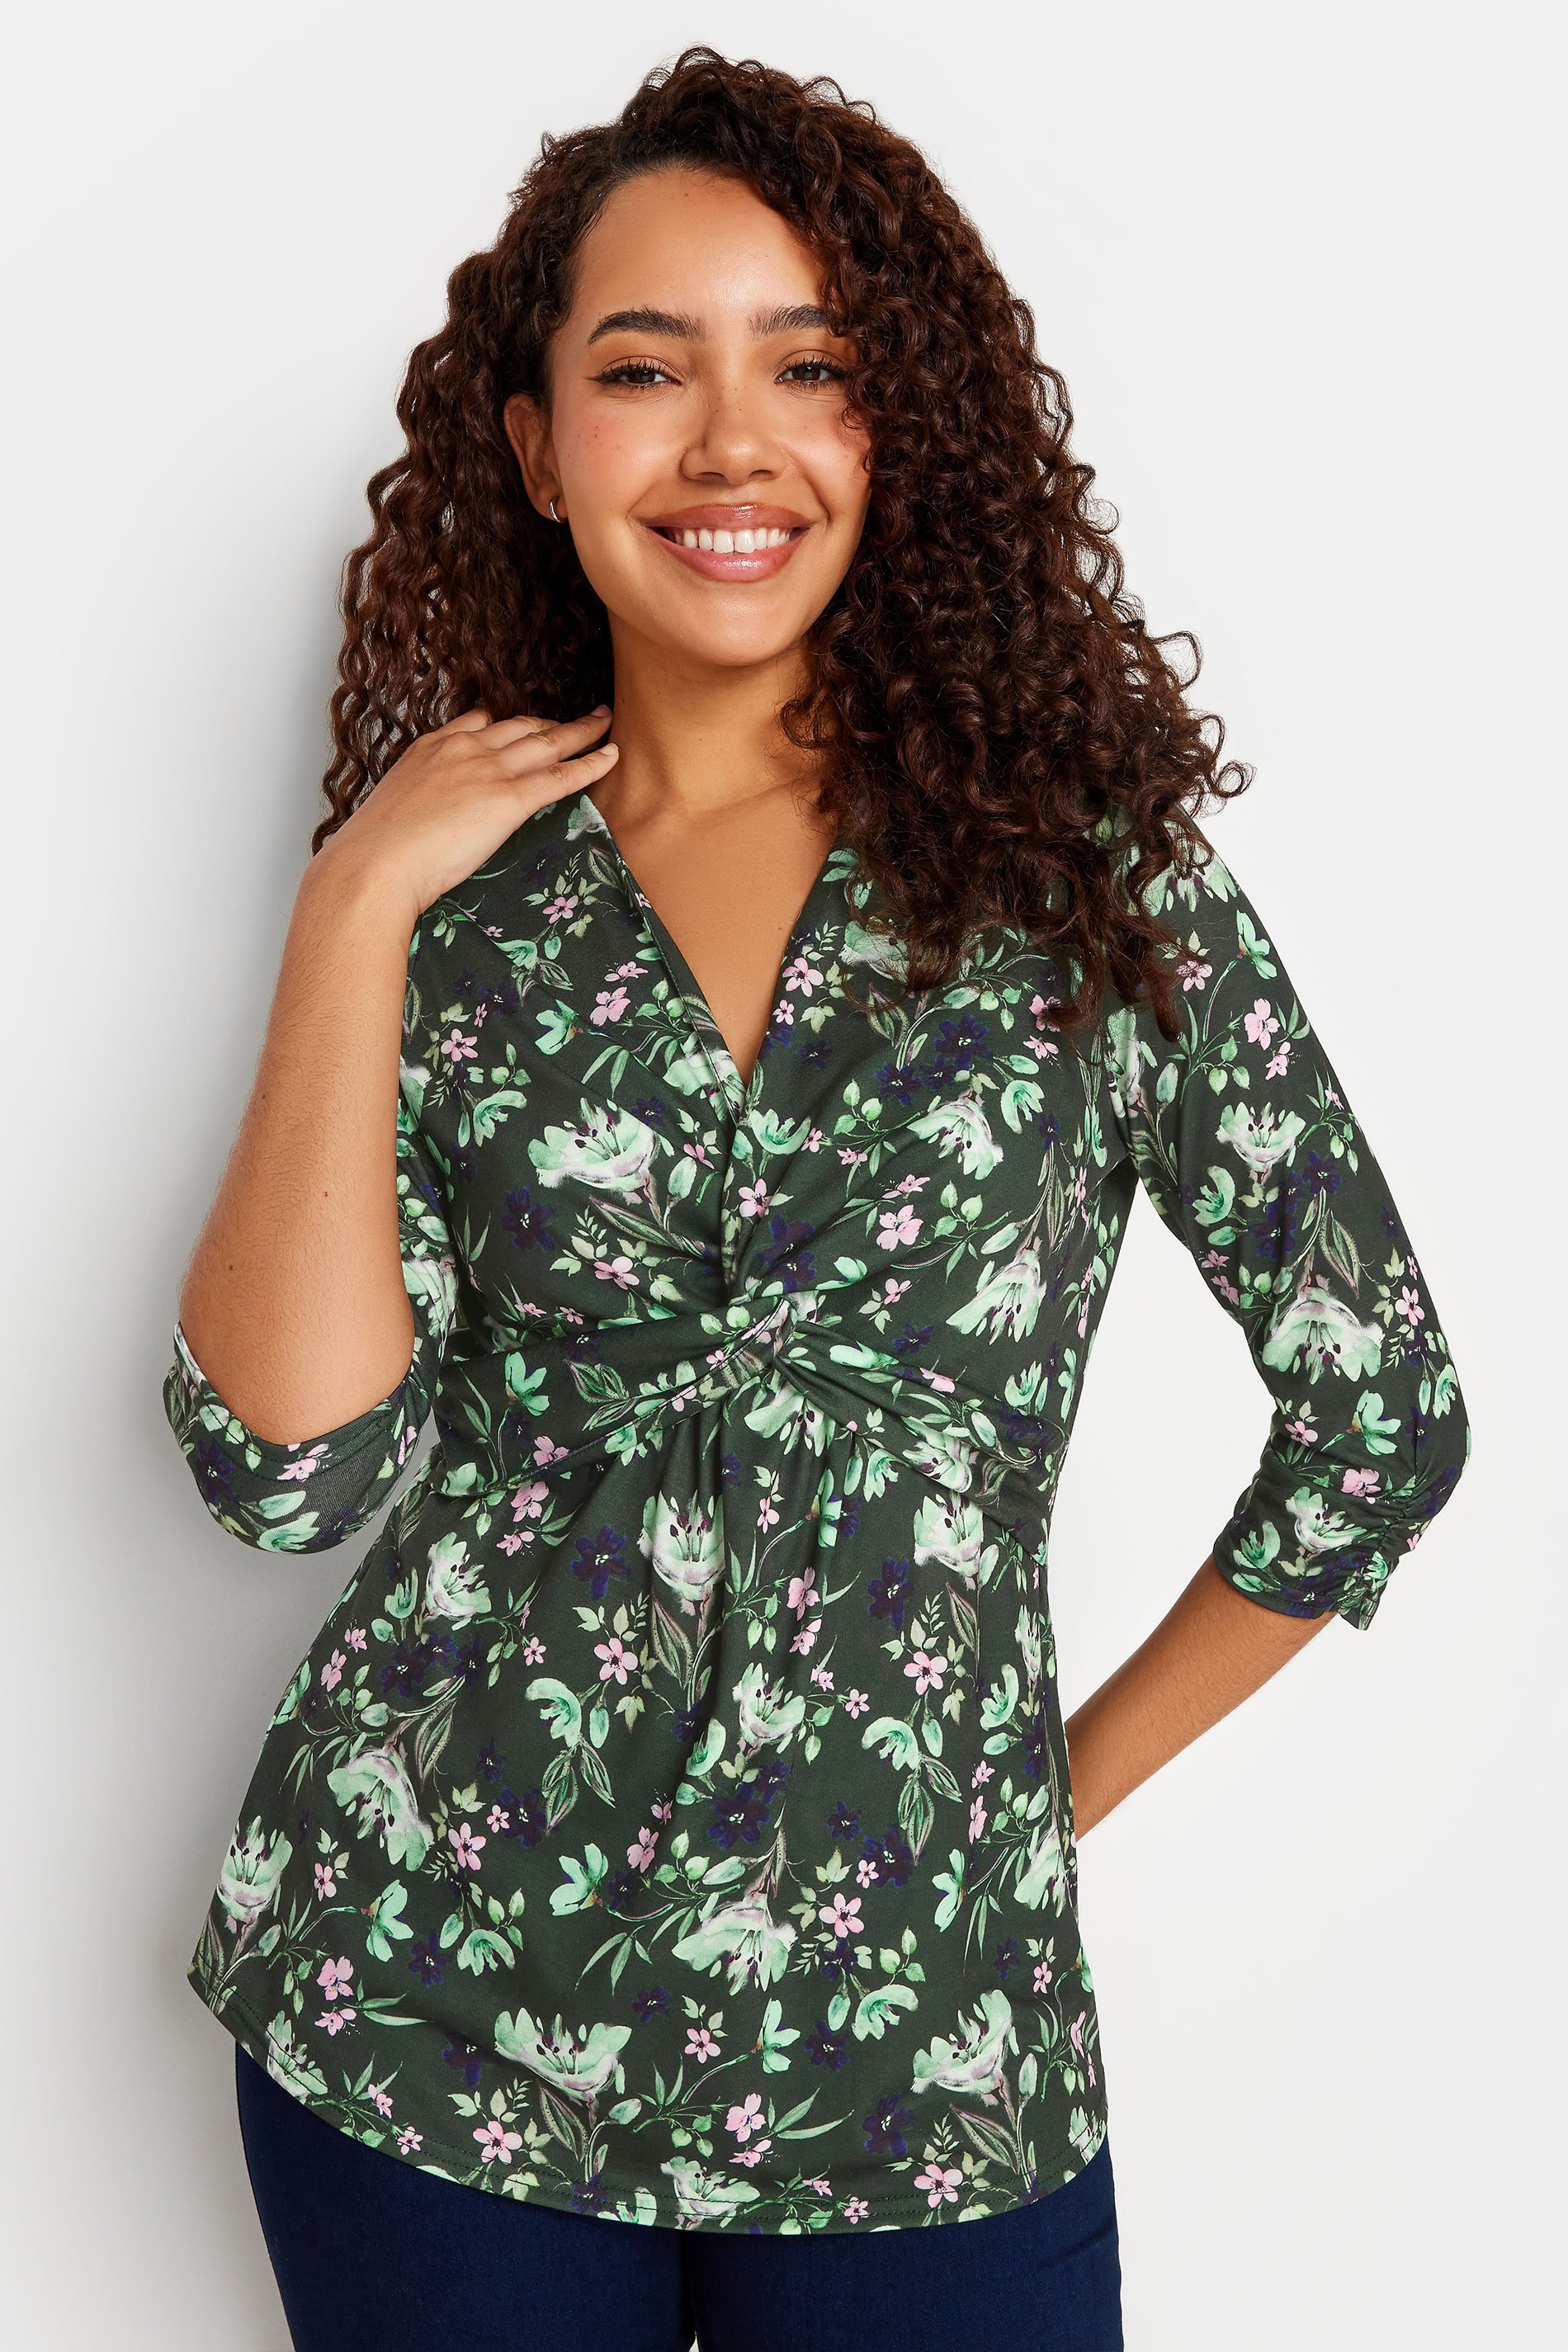 M&Co Green Floral Print Twist Front Top | M&Co 1